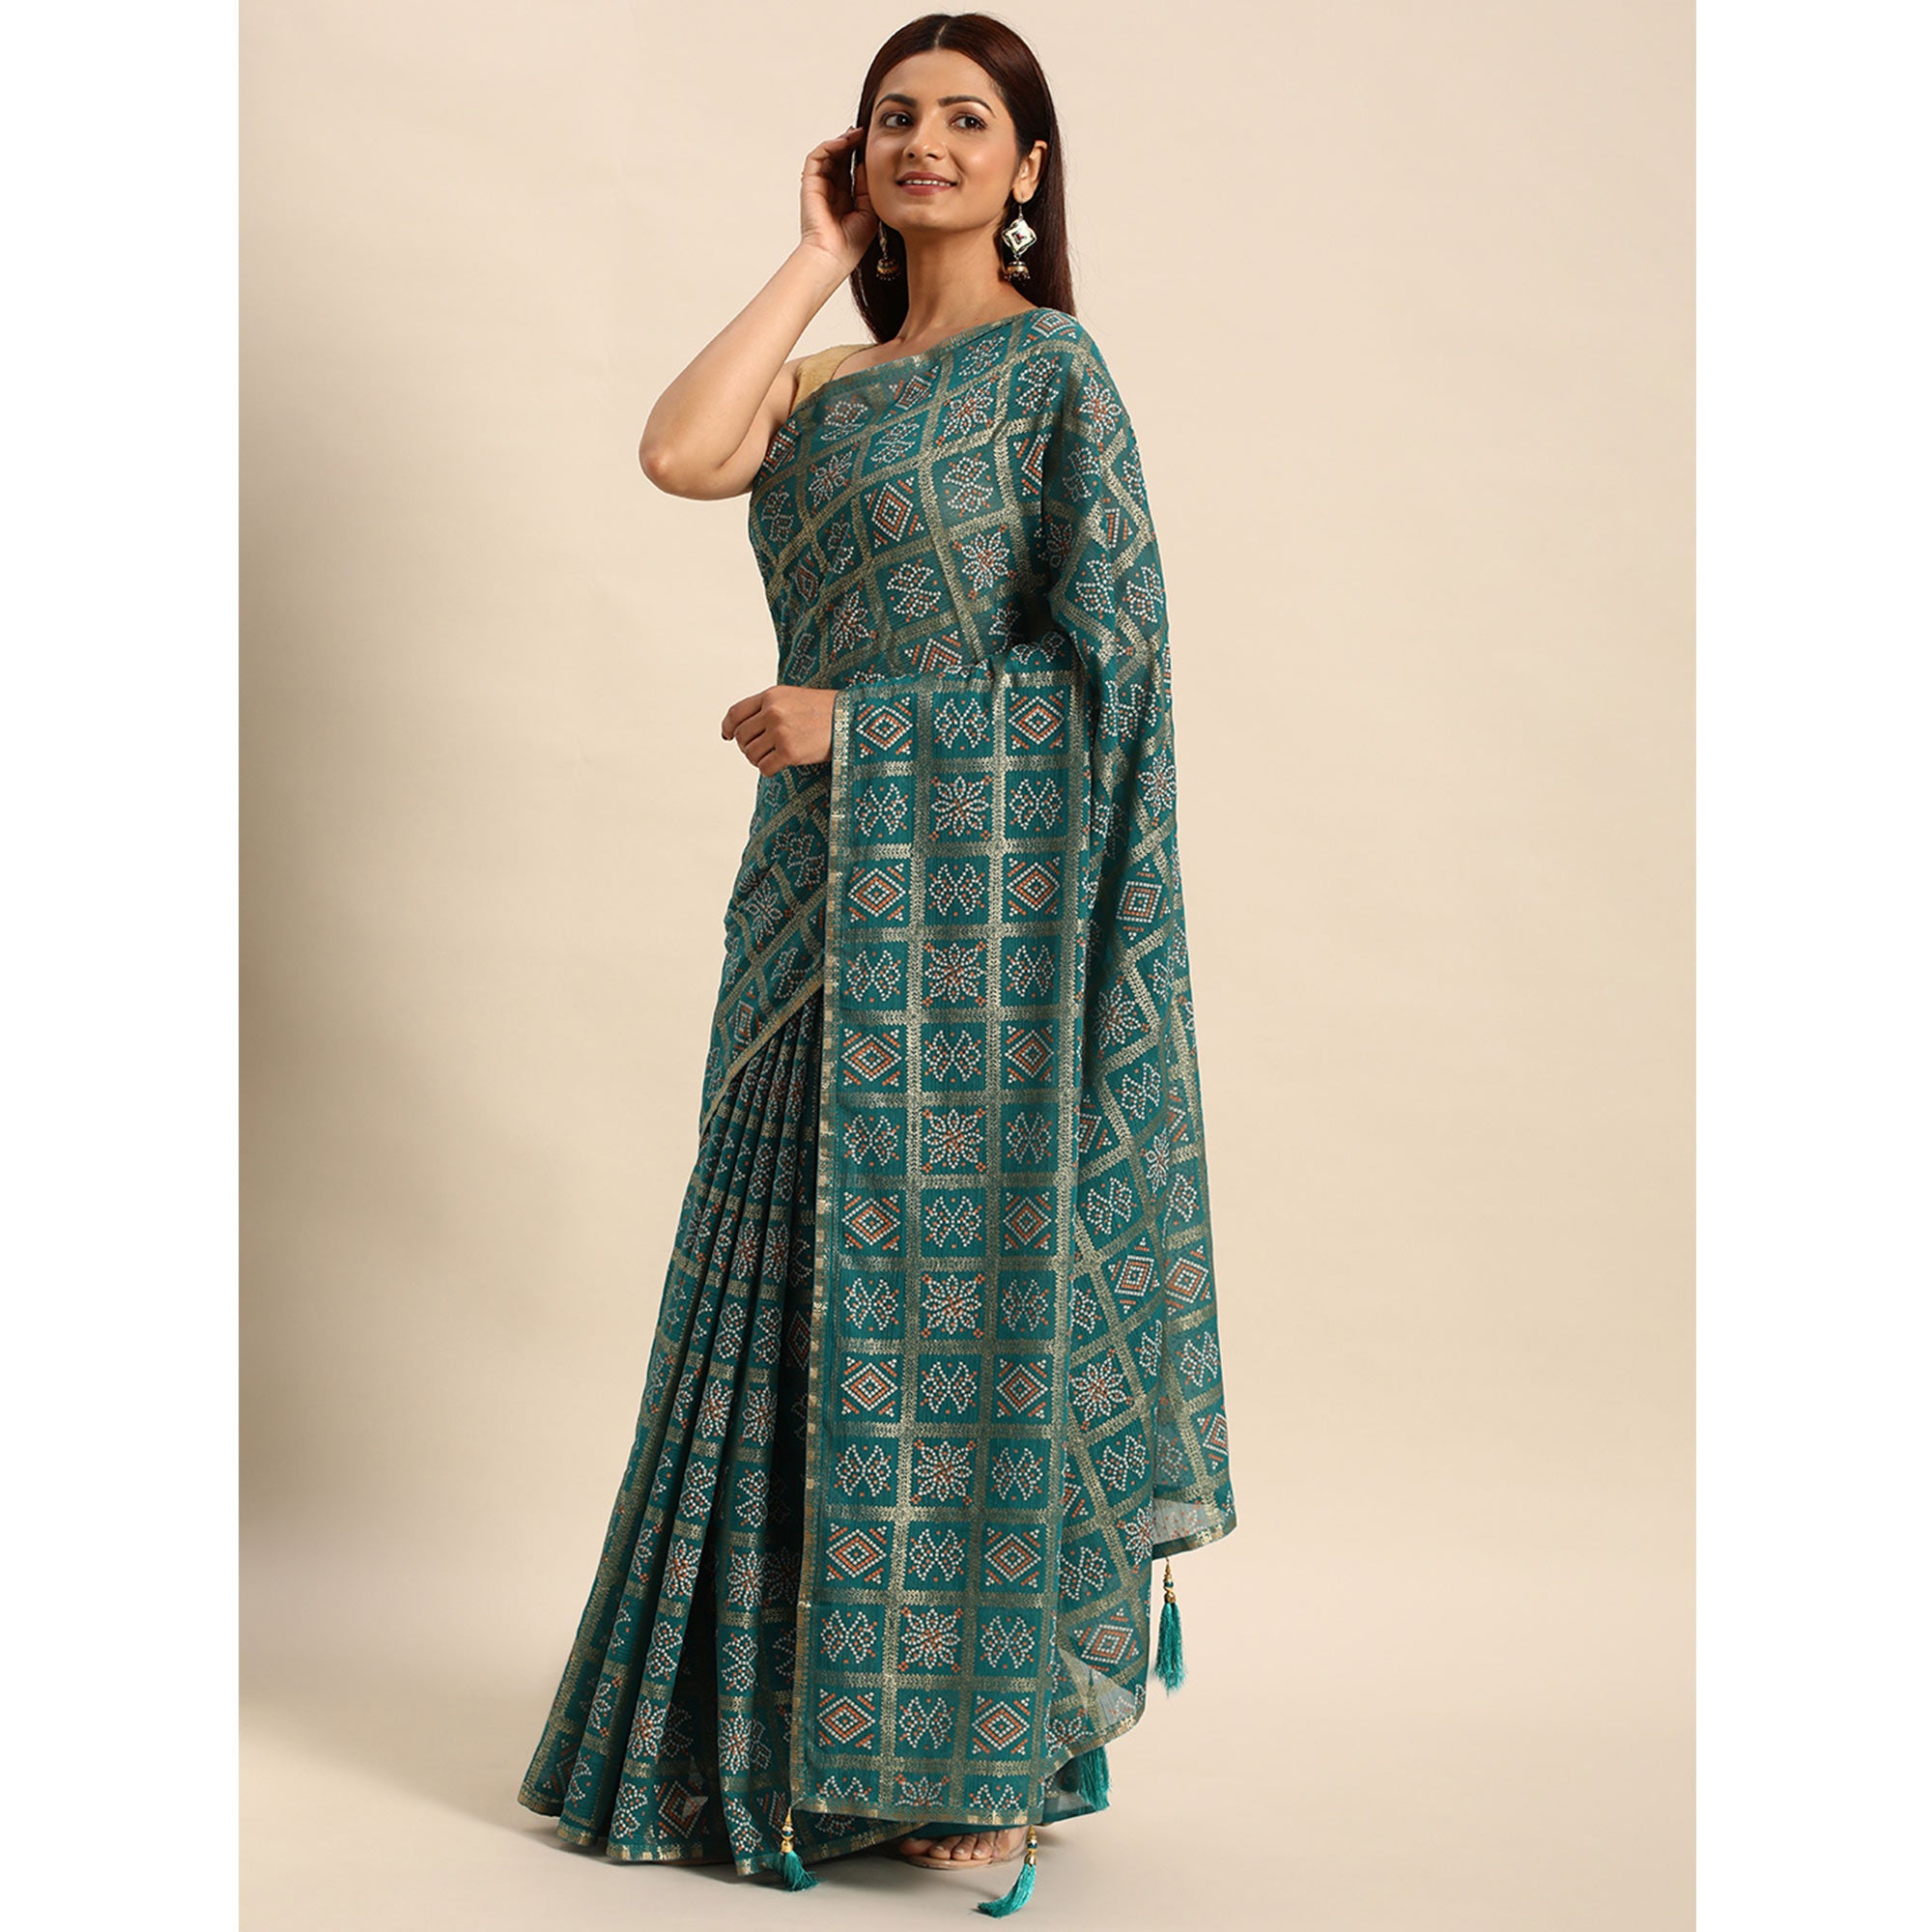 Turquoise Green Bandhani Foil Printed Zomato Saree With Tassels